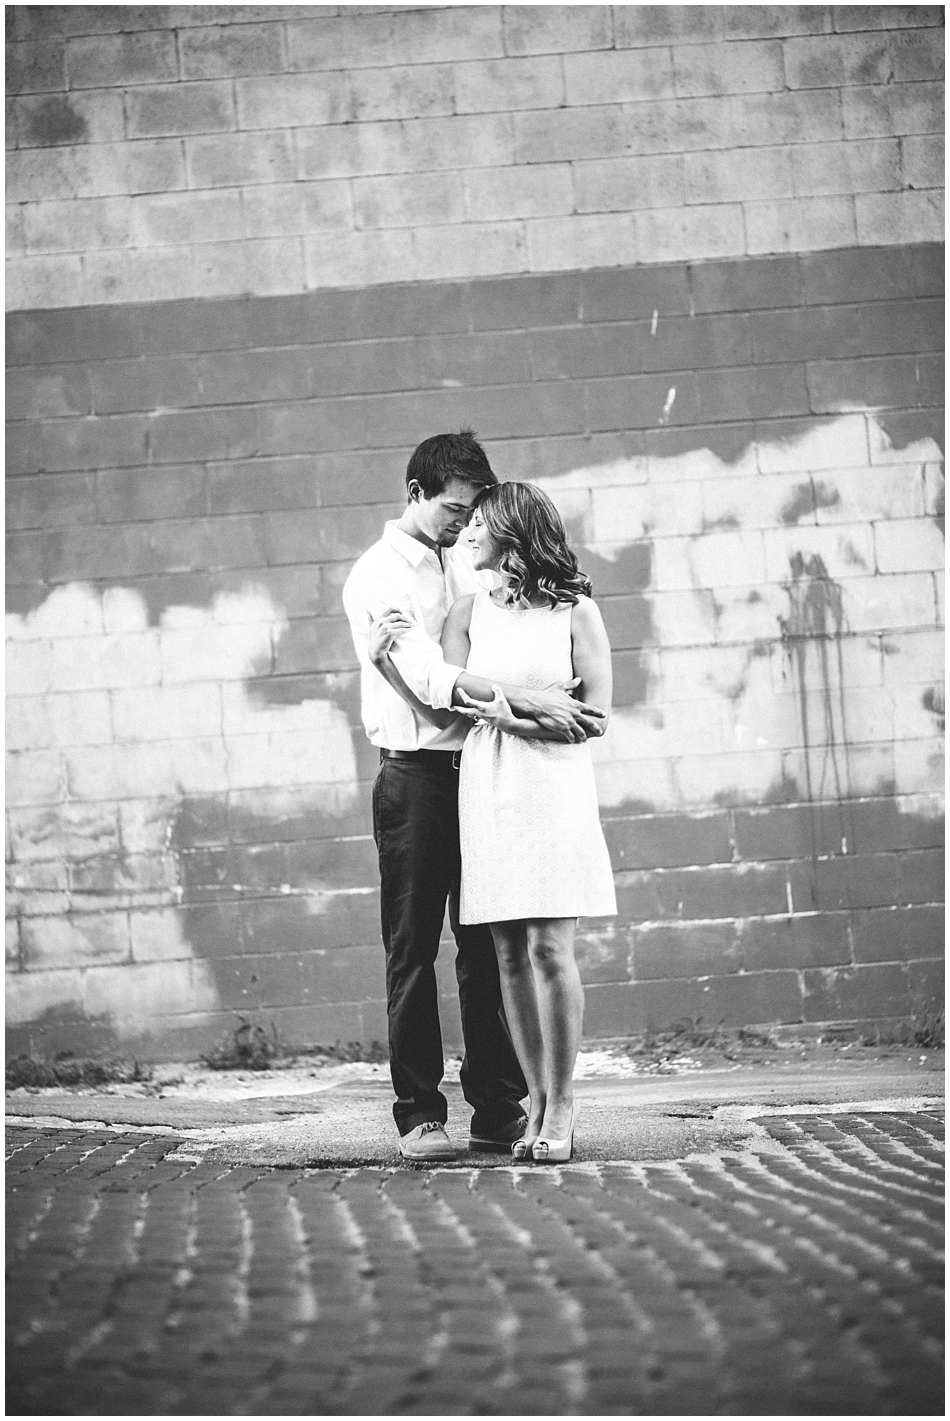 Cute pose for engagement pictures